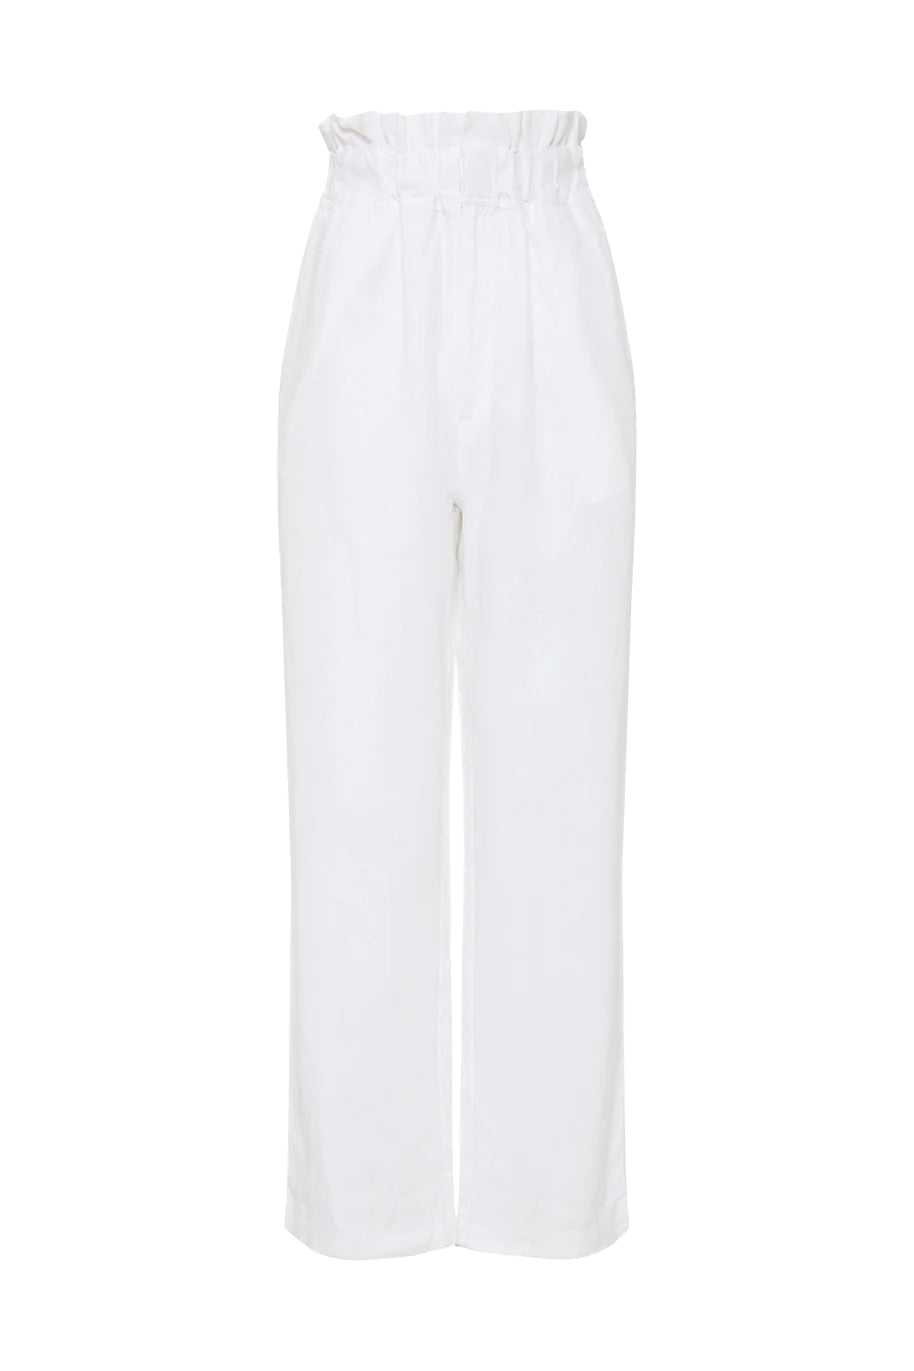 Ducky Pant Ivory